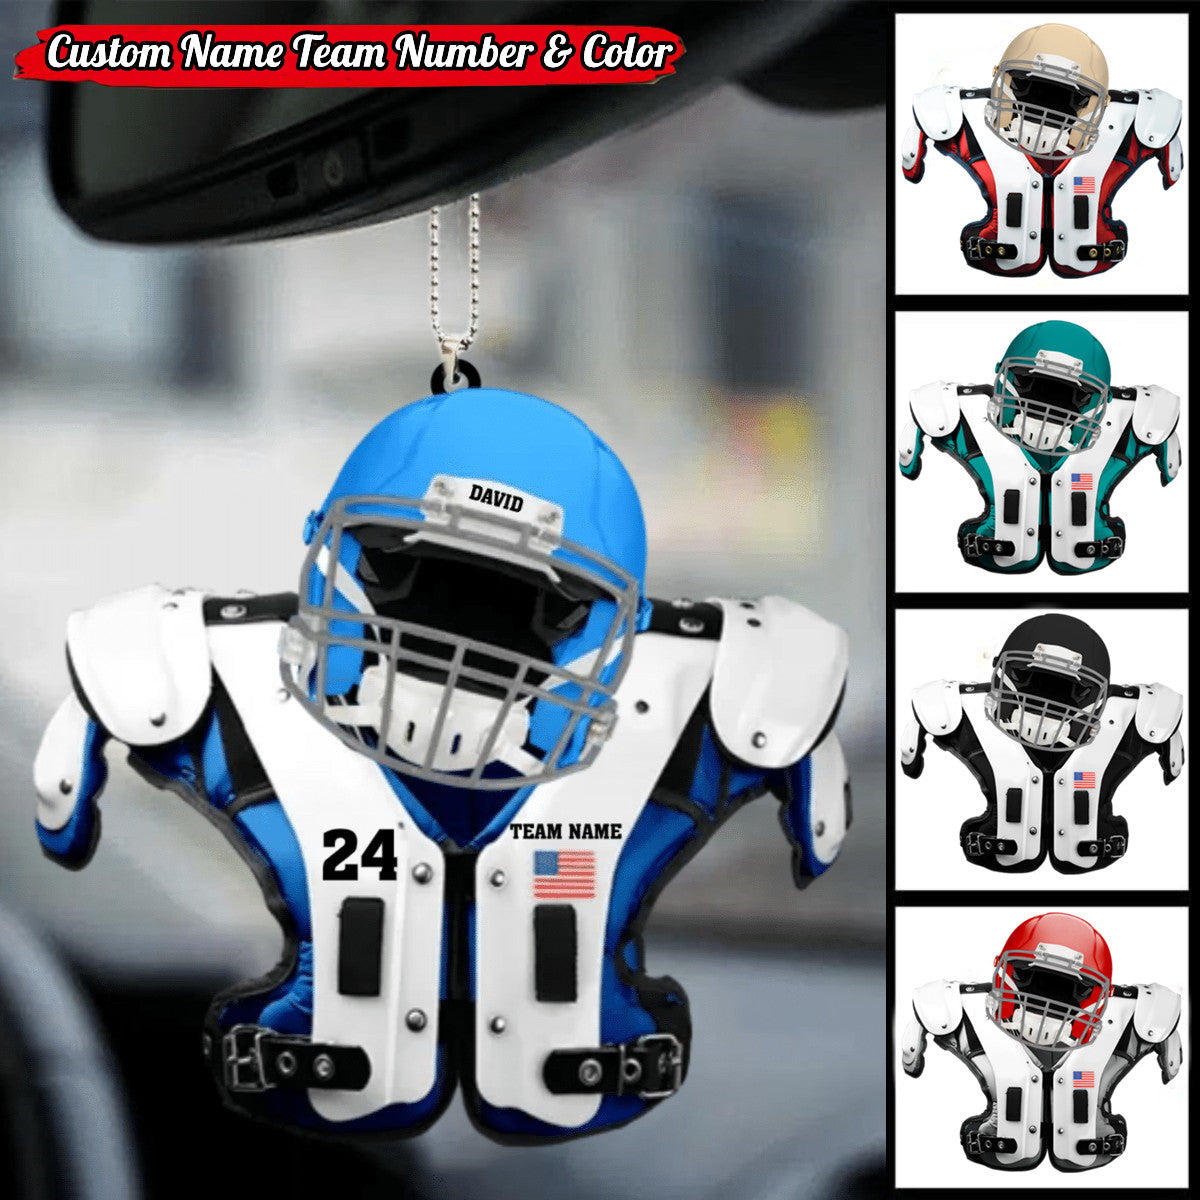 Personalized Helmet & Shoulder Pad Flat Acrylic Ornament  For Football Player